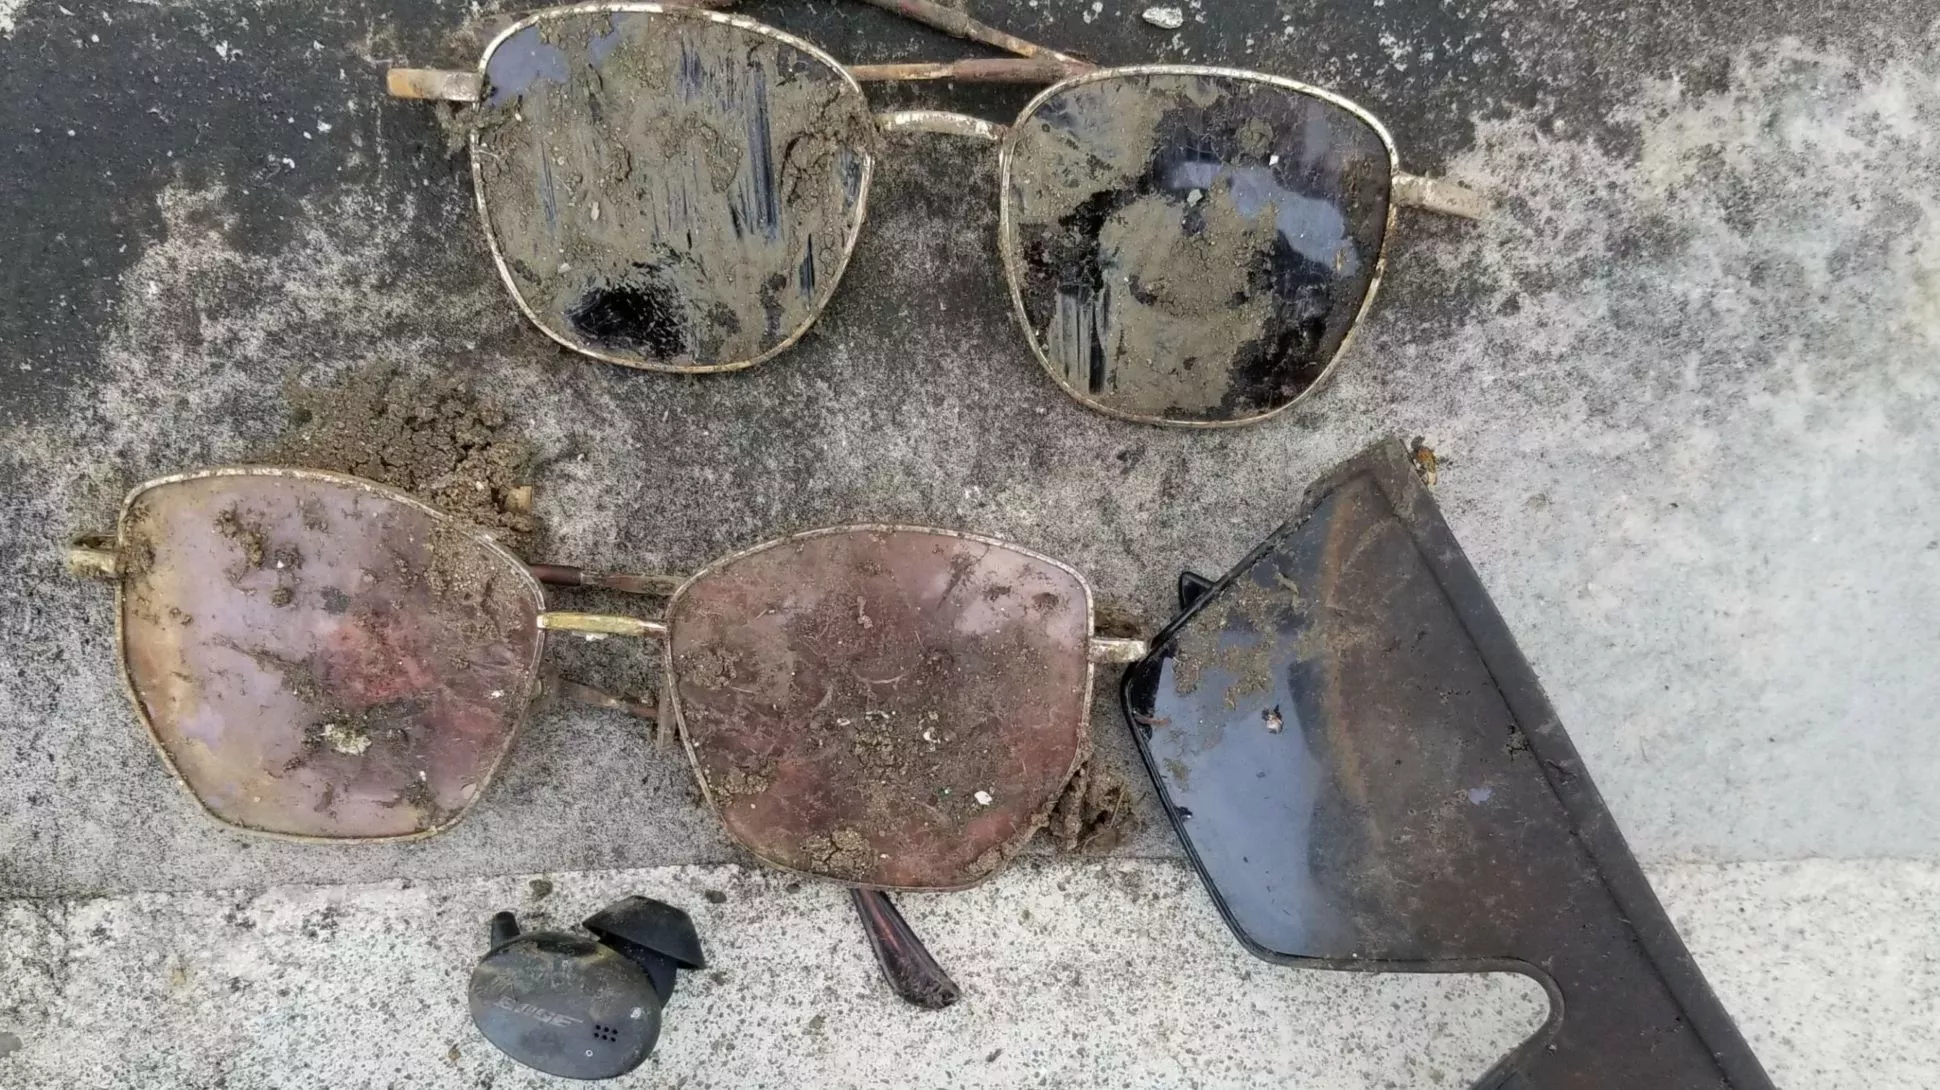 A collection of sunglasses and one Bose earbud covered in mud